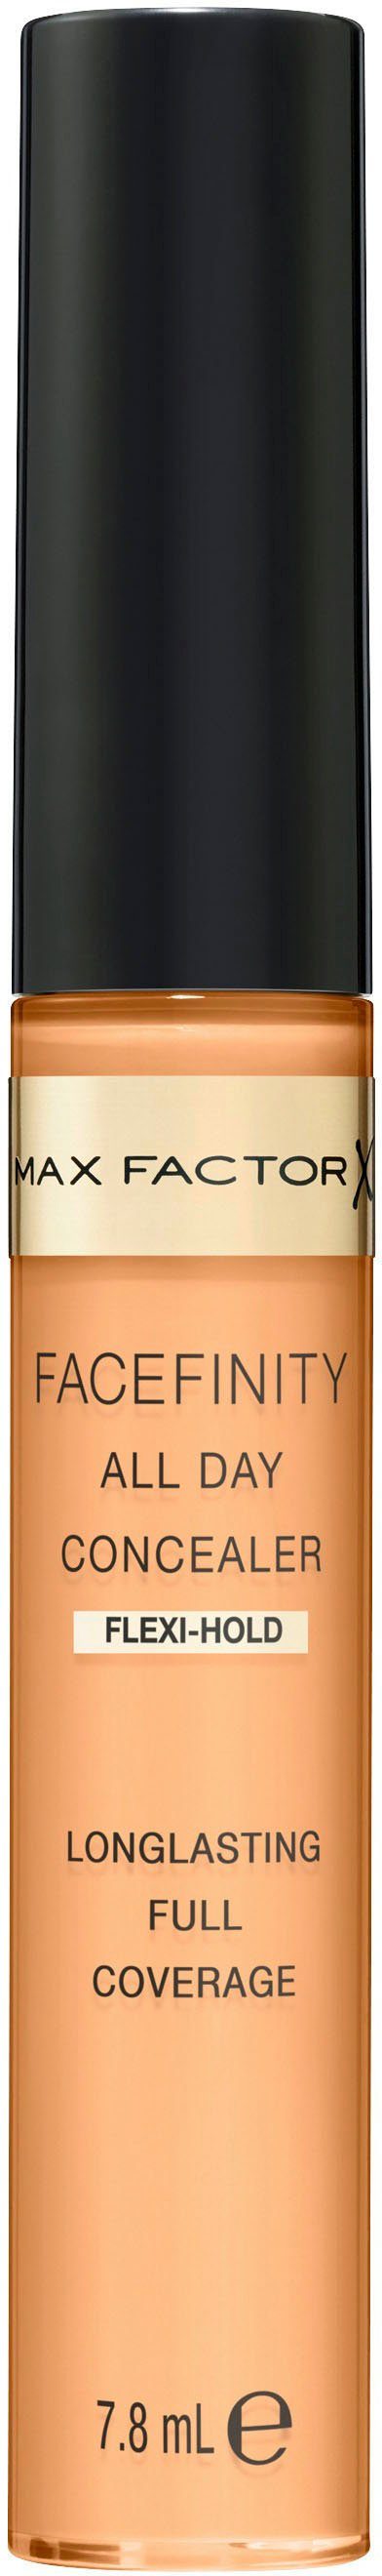 Day FACTOR MAX FACEFINITY Concealer All Flawless 70